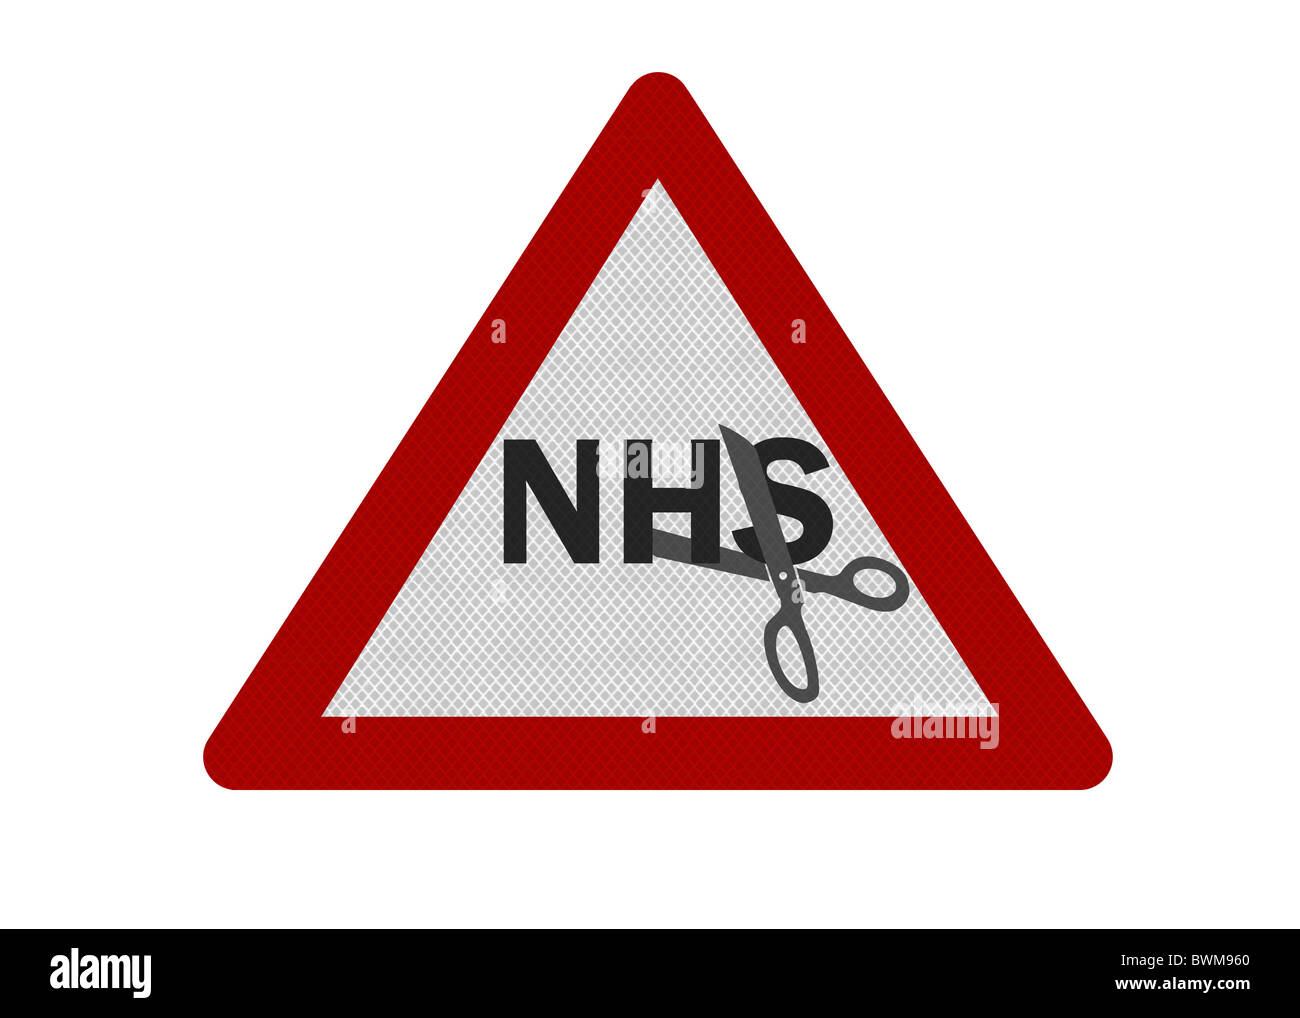 Photo realistic reflective metallic 'NHS cuts' sign, isolated on a pure white background. Stock Photo